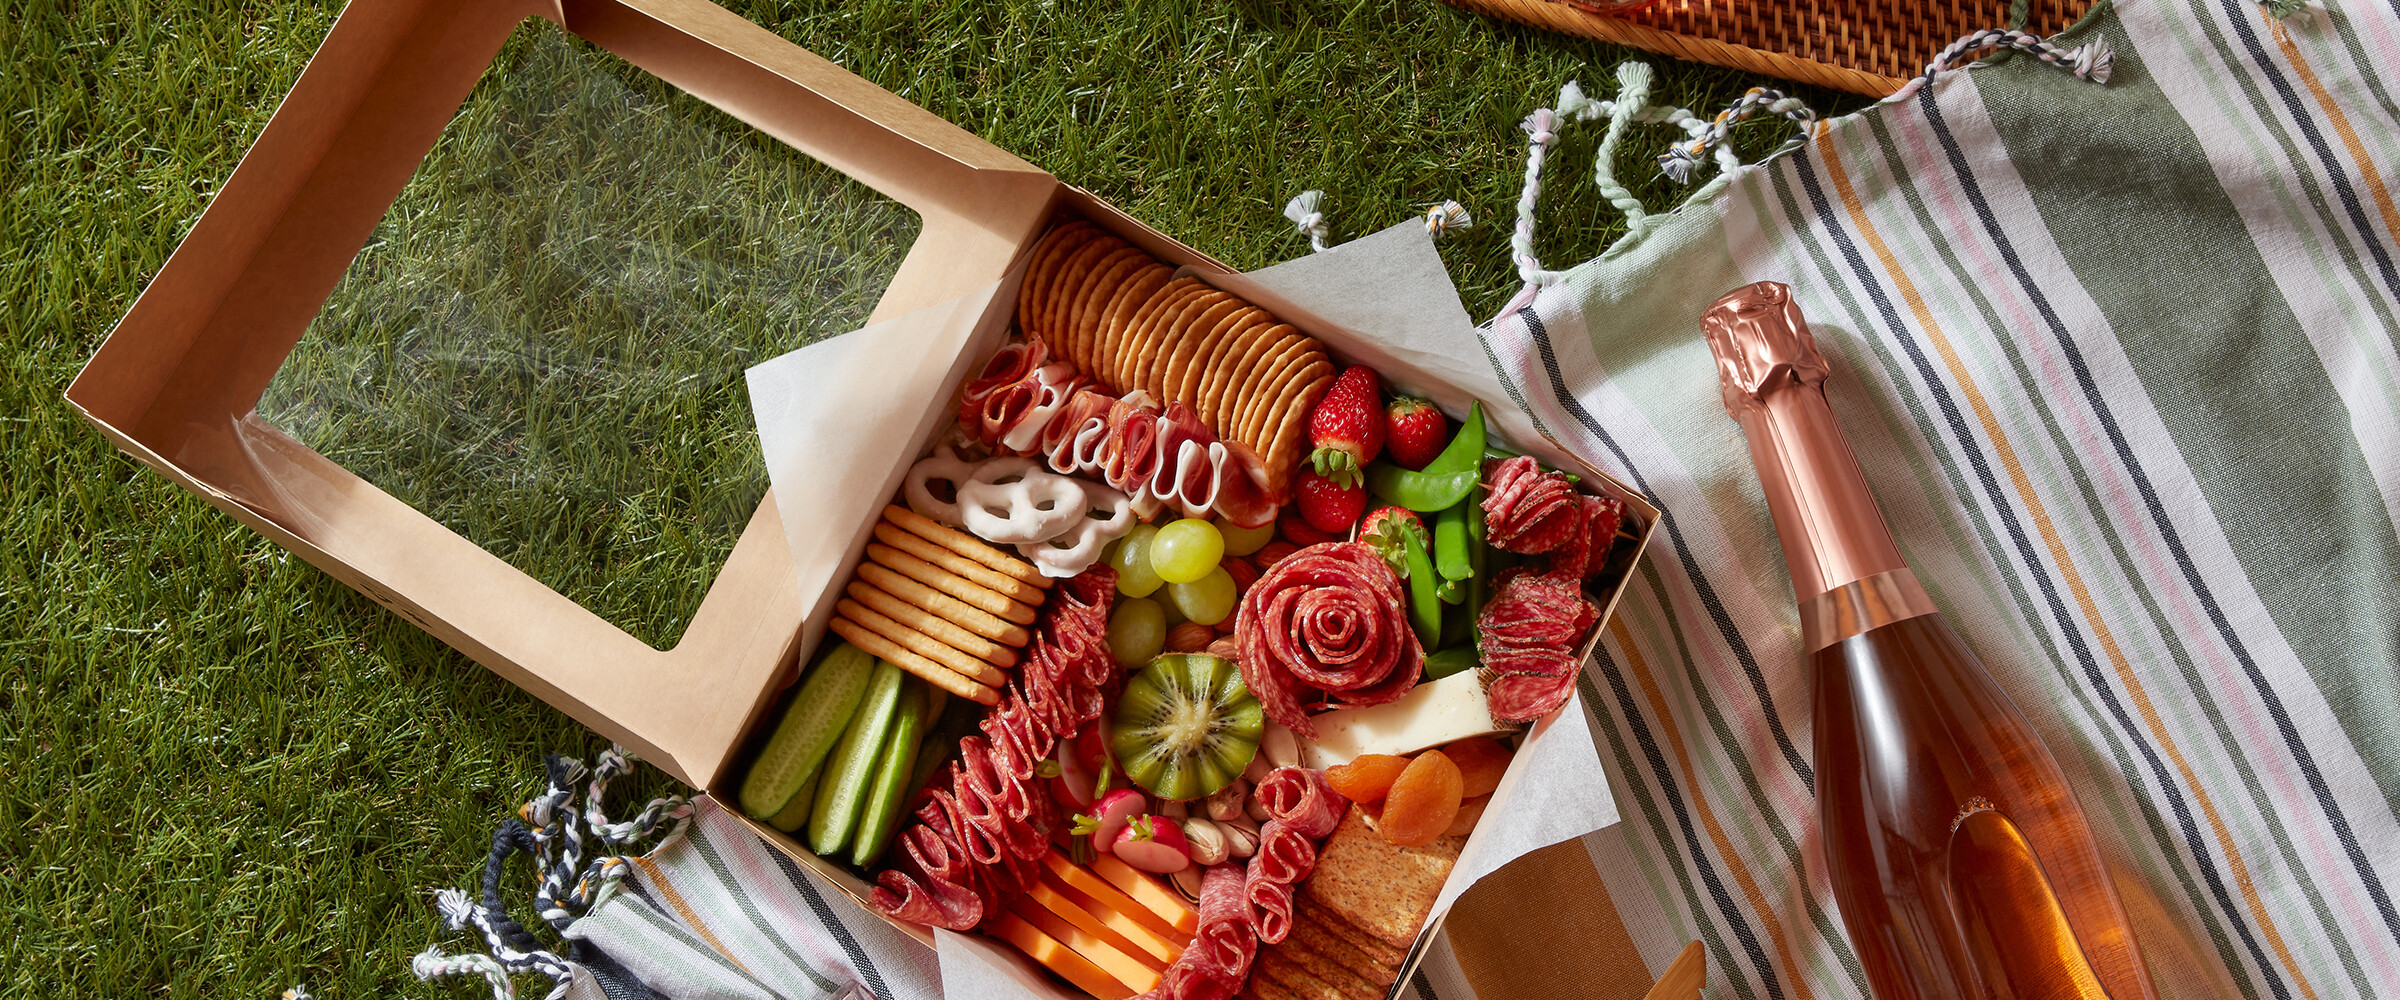 charcuterie grazing box on a picnic blanket